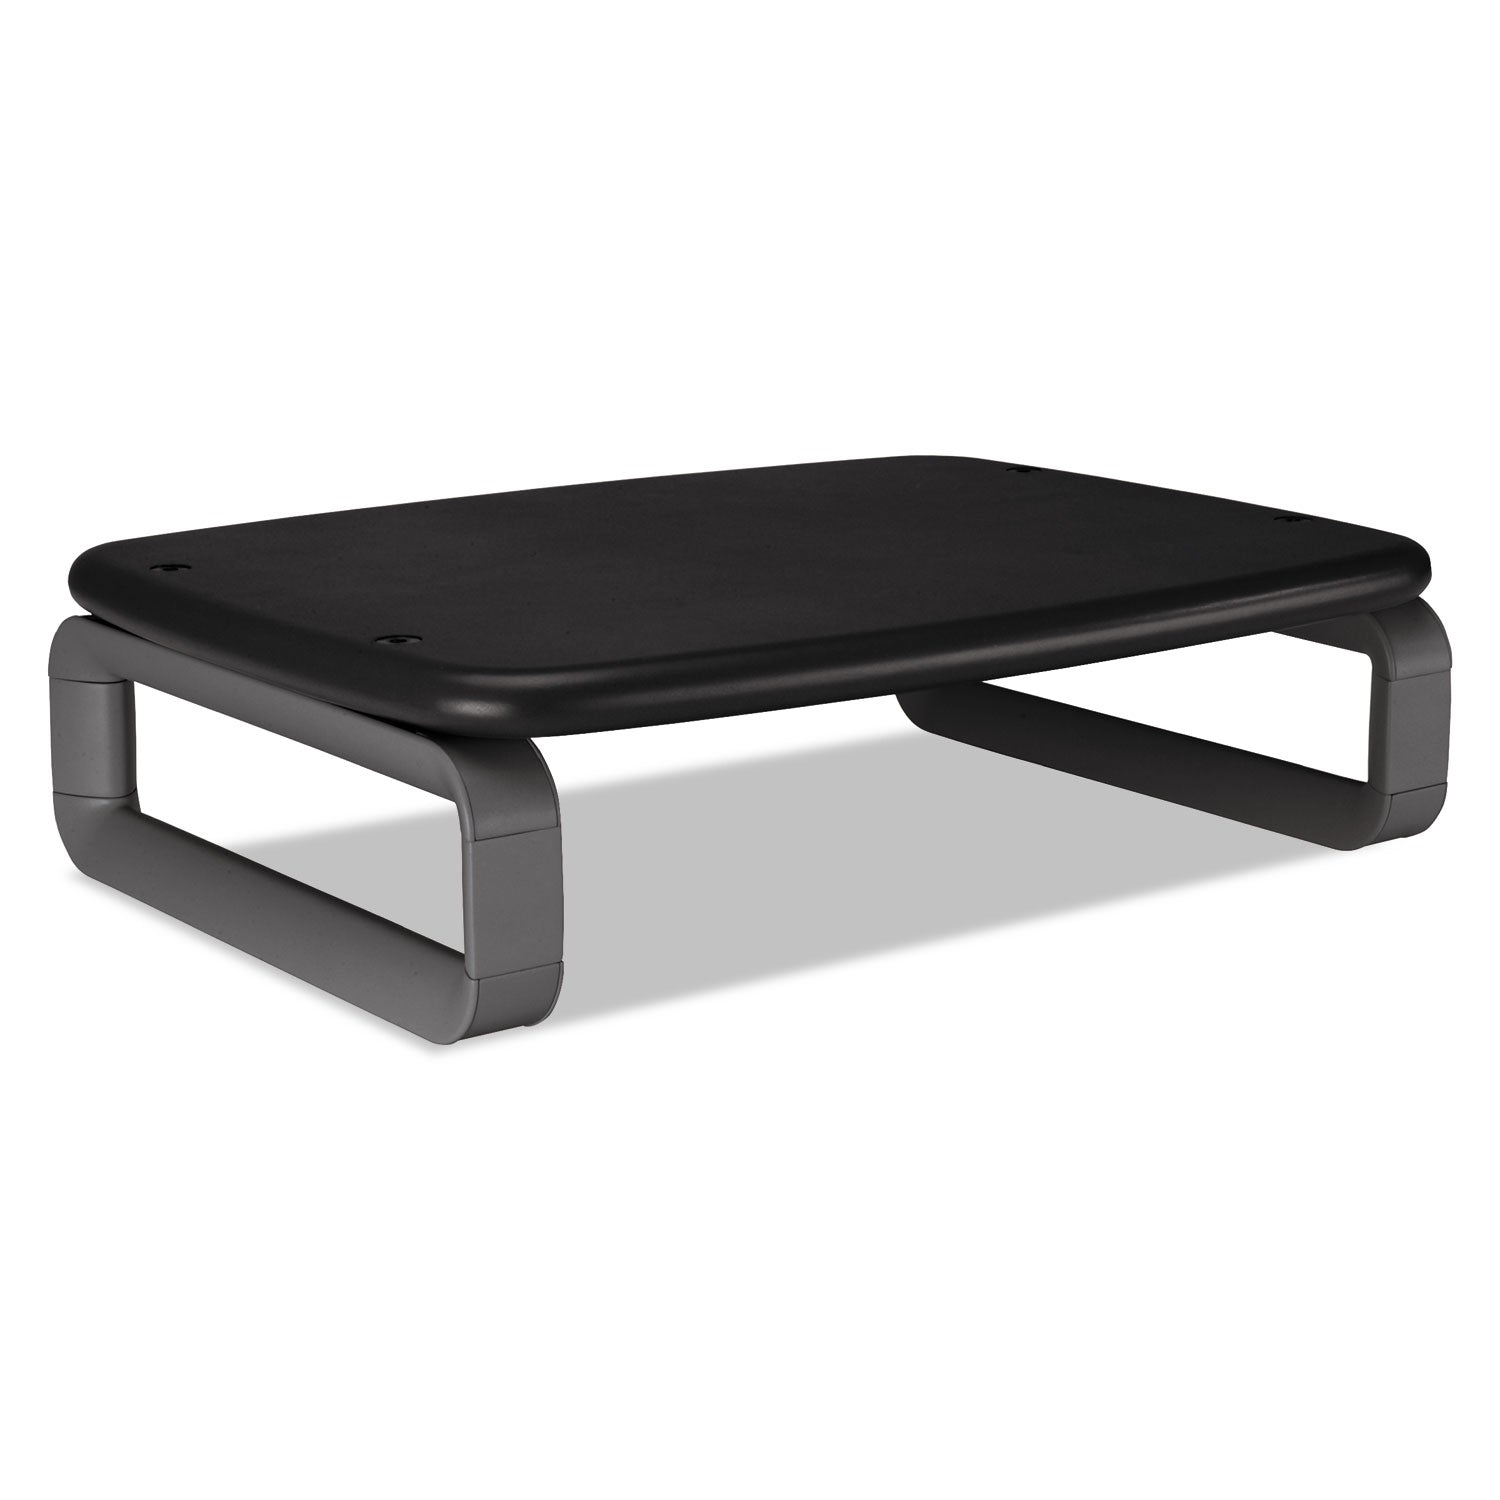 Monitor Stand with SmartFit, For 24" Monitors, 15.5" x 12" x 3" to 6", Black/Gray, Supports 80 lbs - 